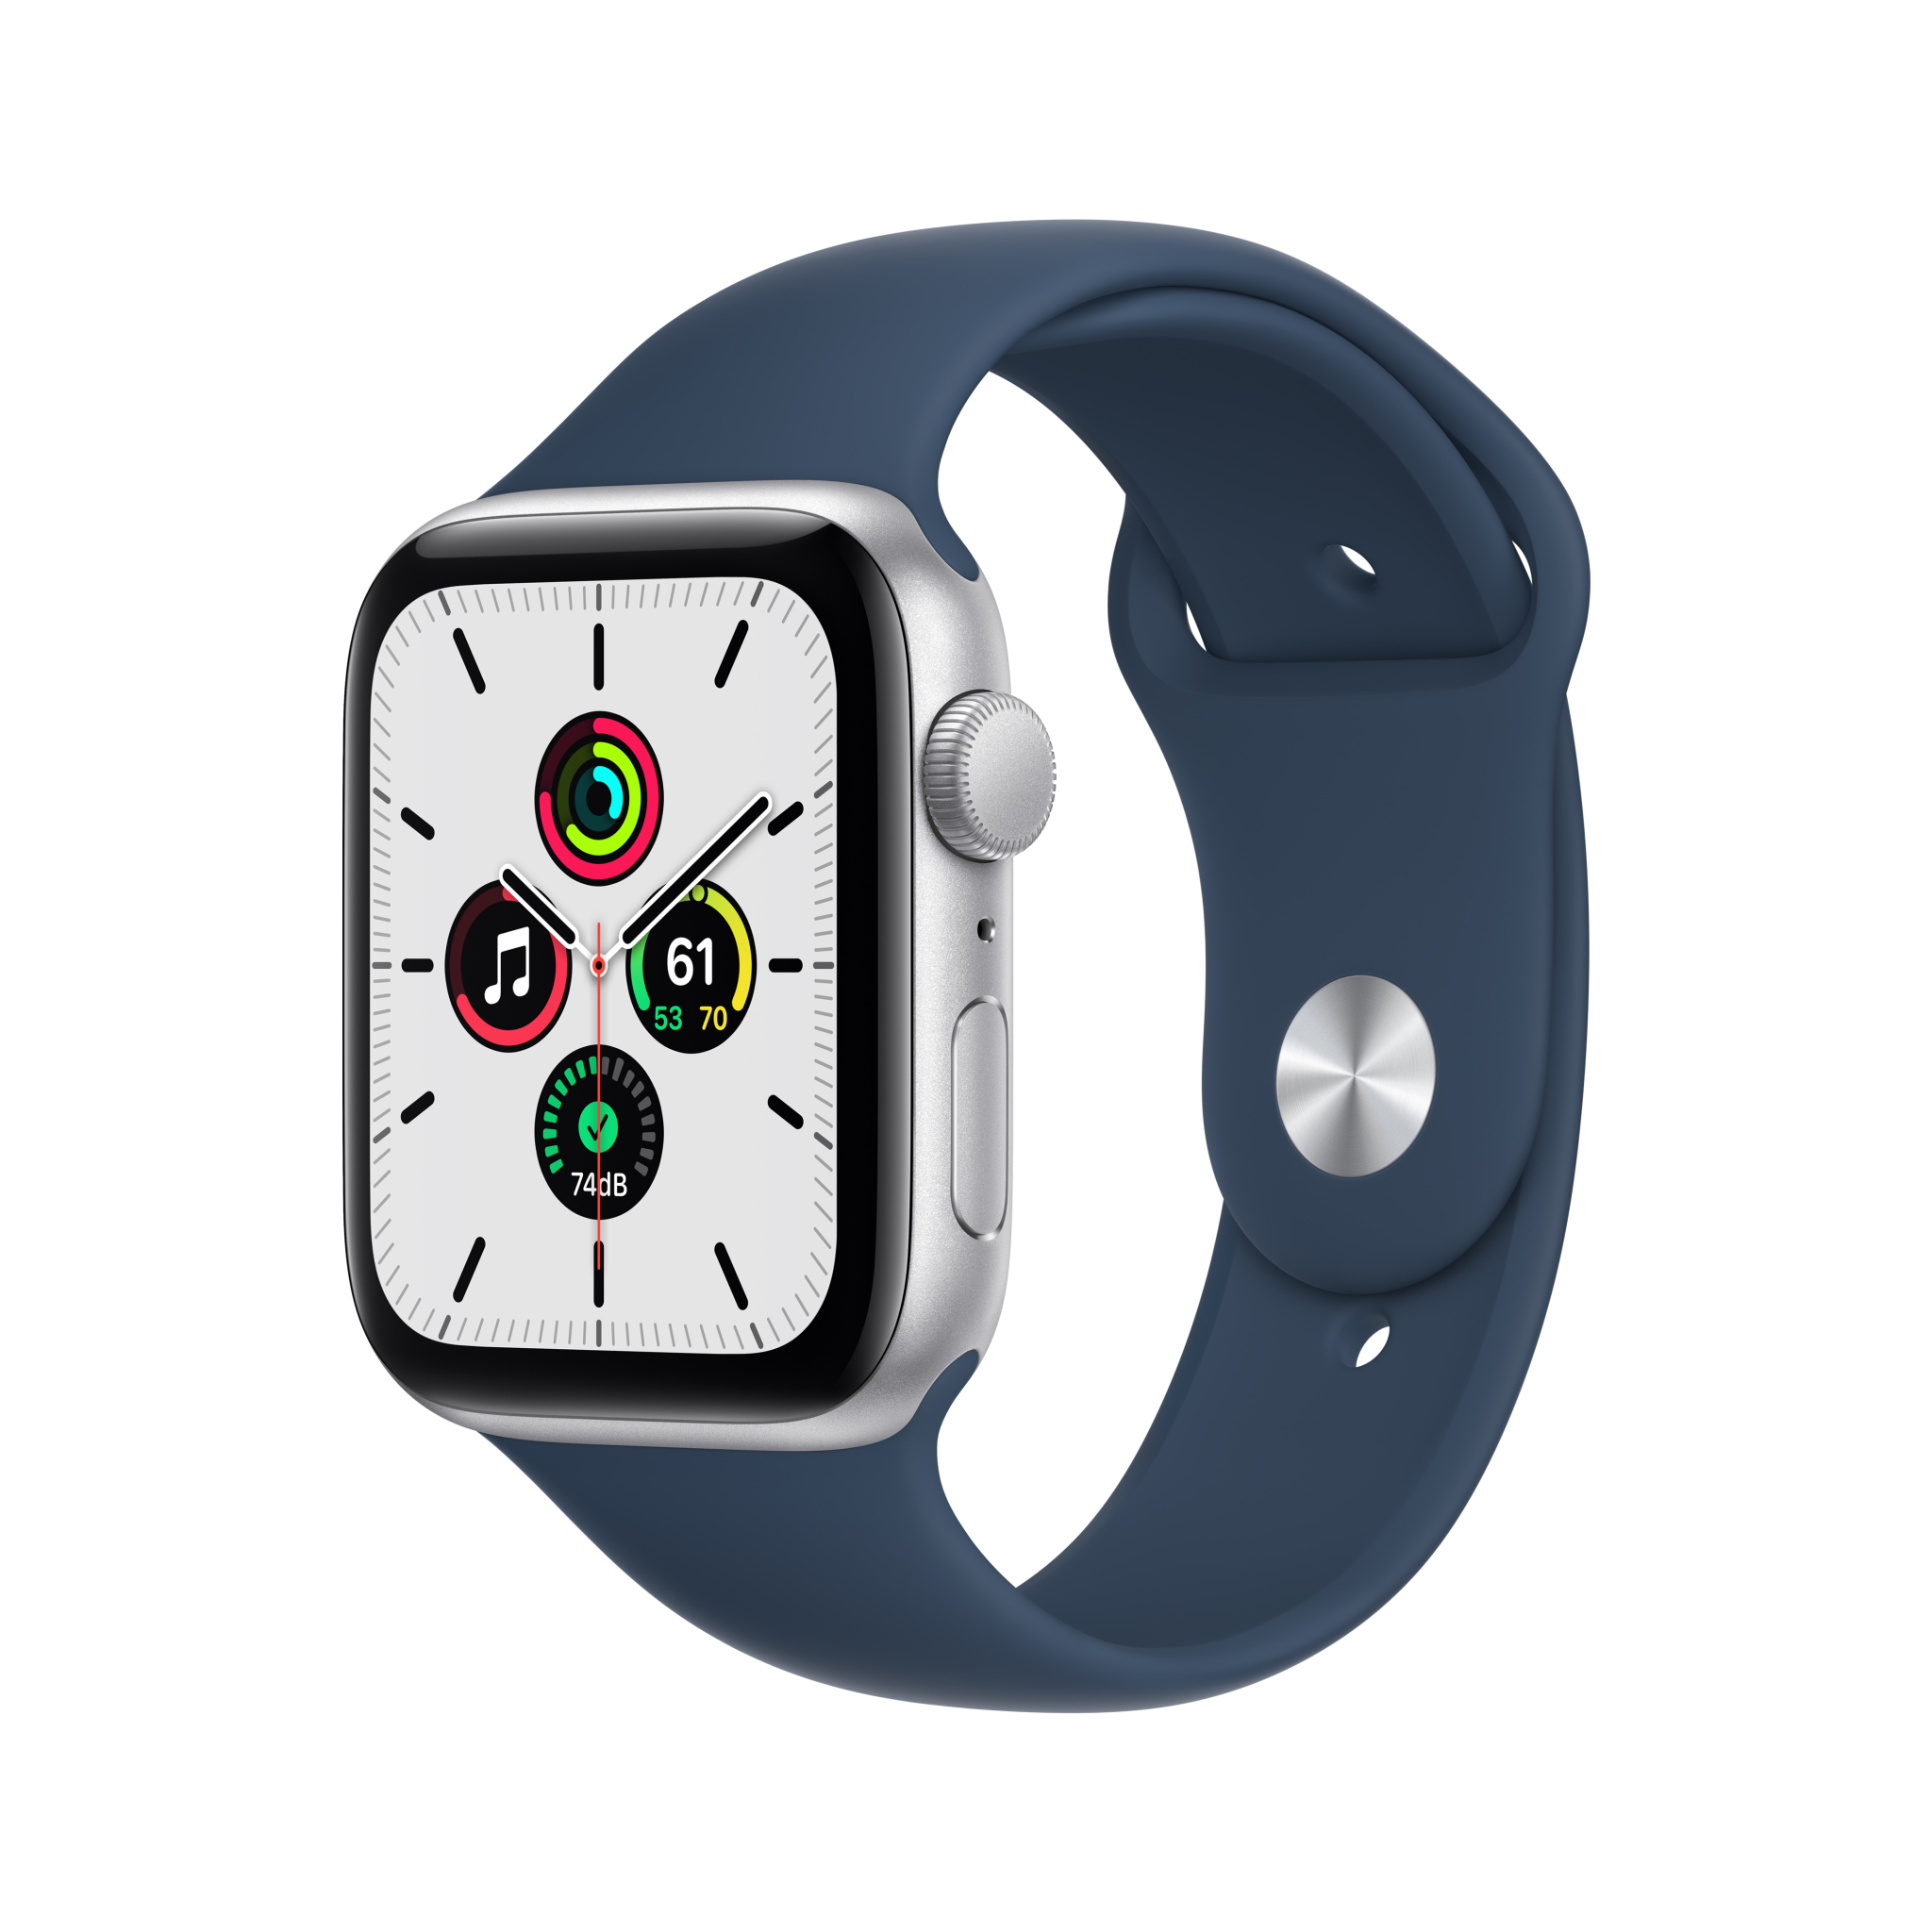 Apple Watch SE (1st Gen) GPS, 44mm Silver Aluminum Case with Abyss Blue Sport Band - Regular - image 1 of 9